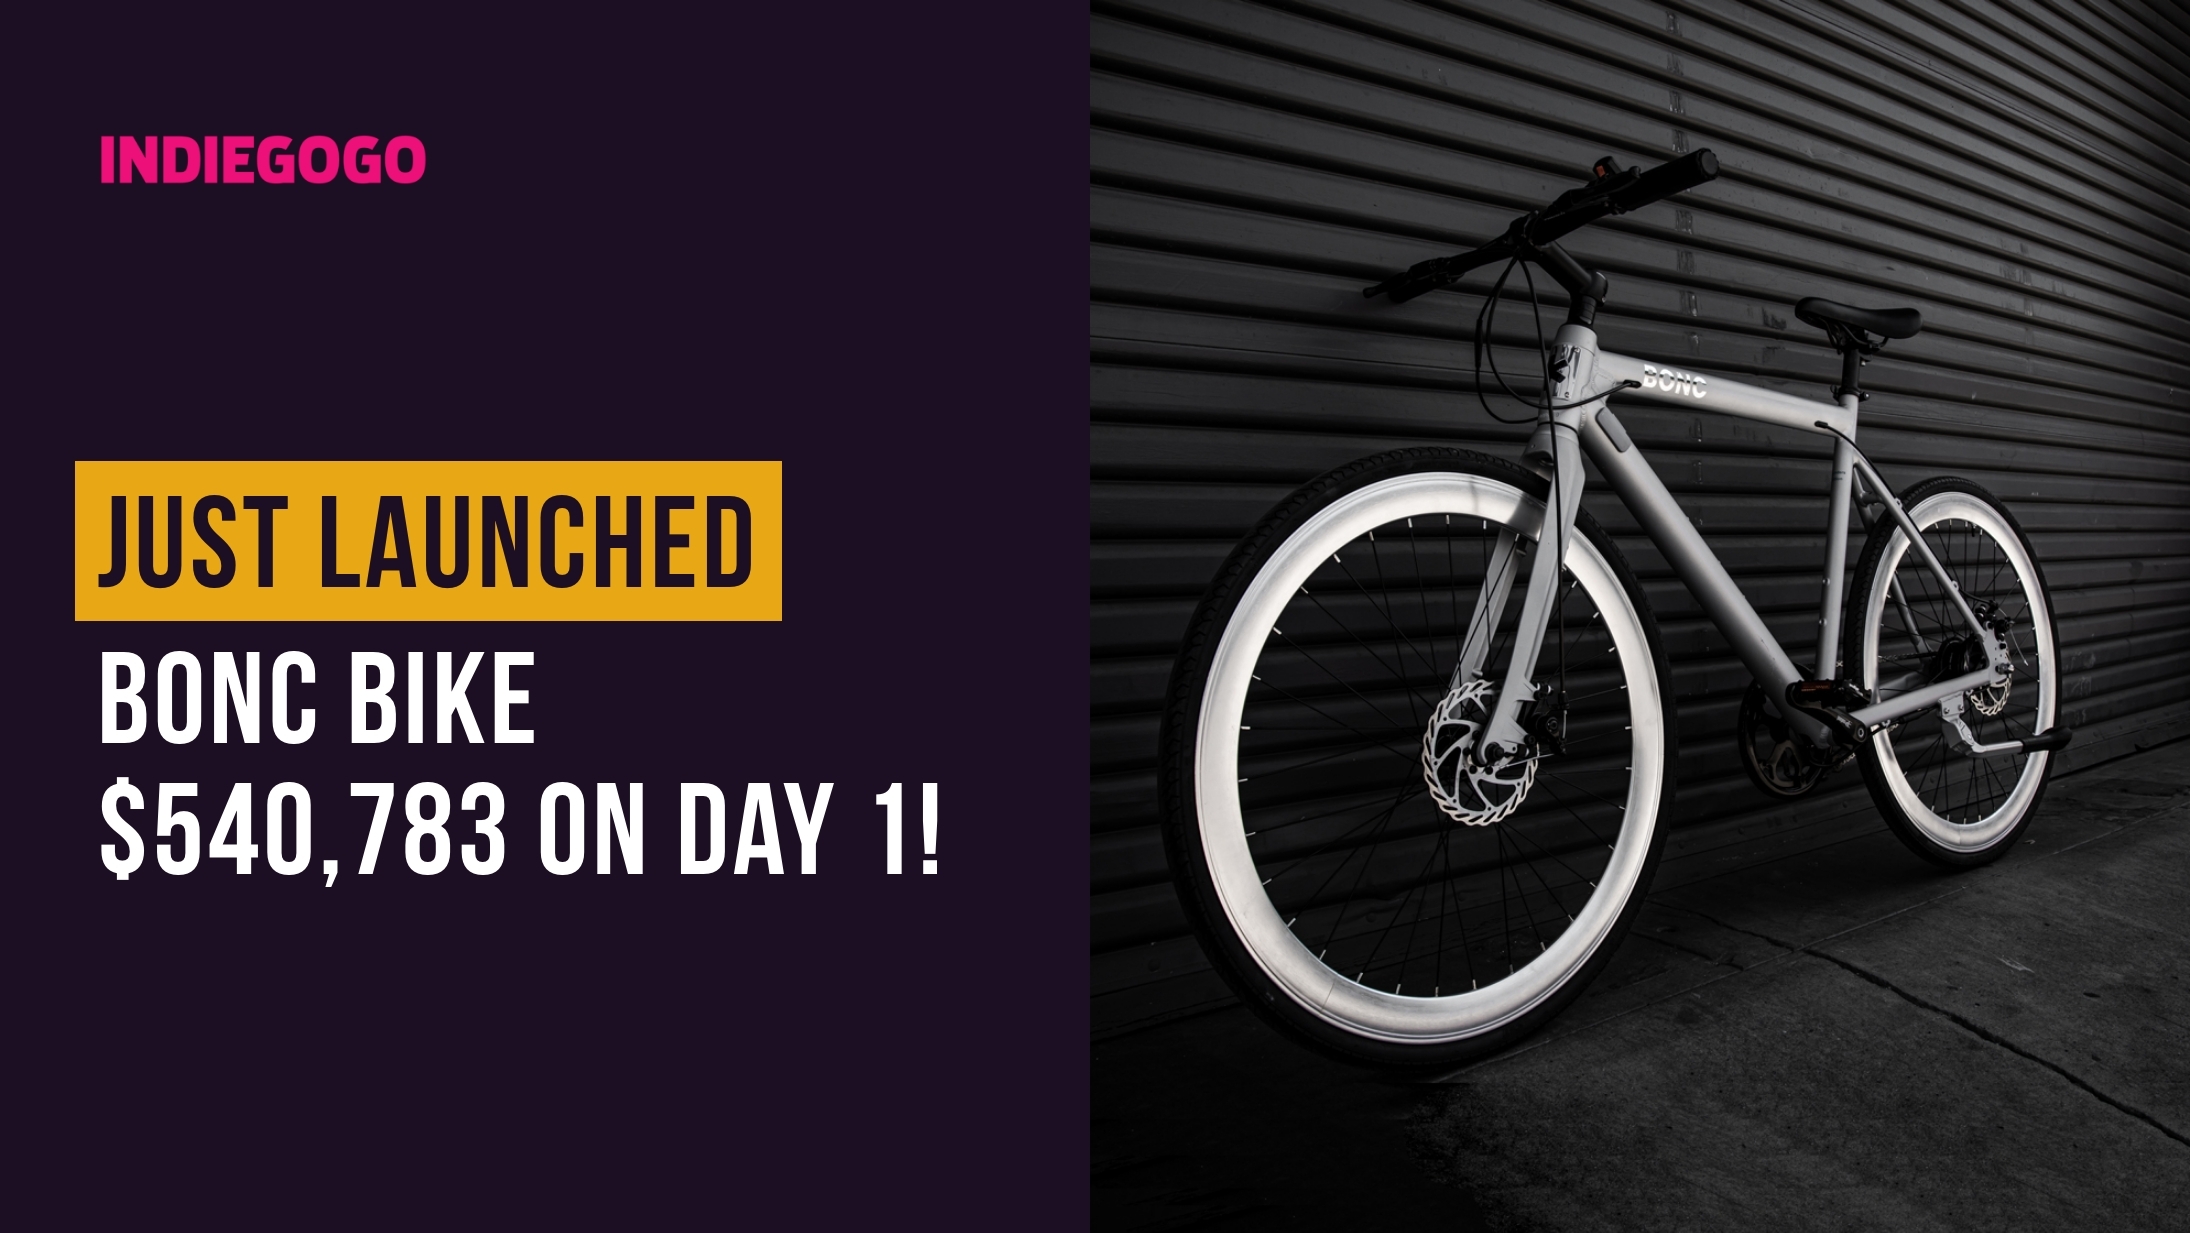 Just Launched: Bonc Bike – $540,783 on Day 1!